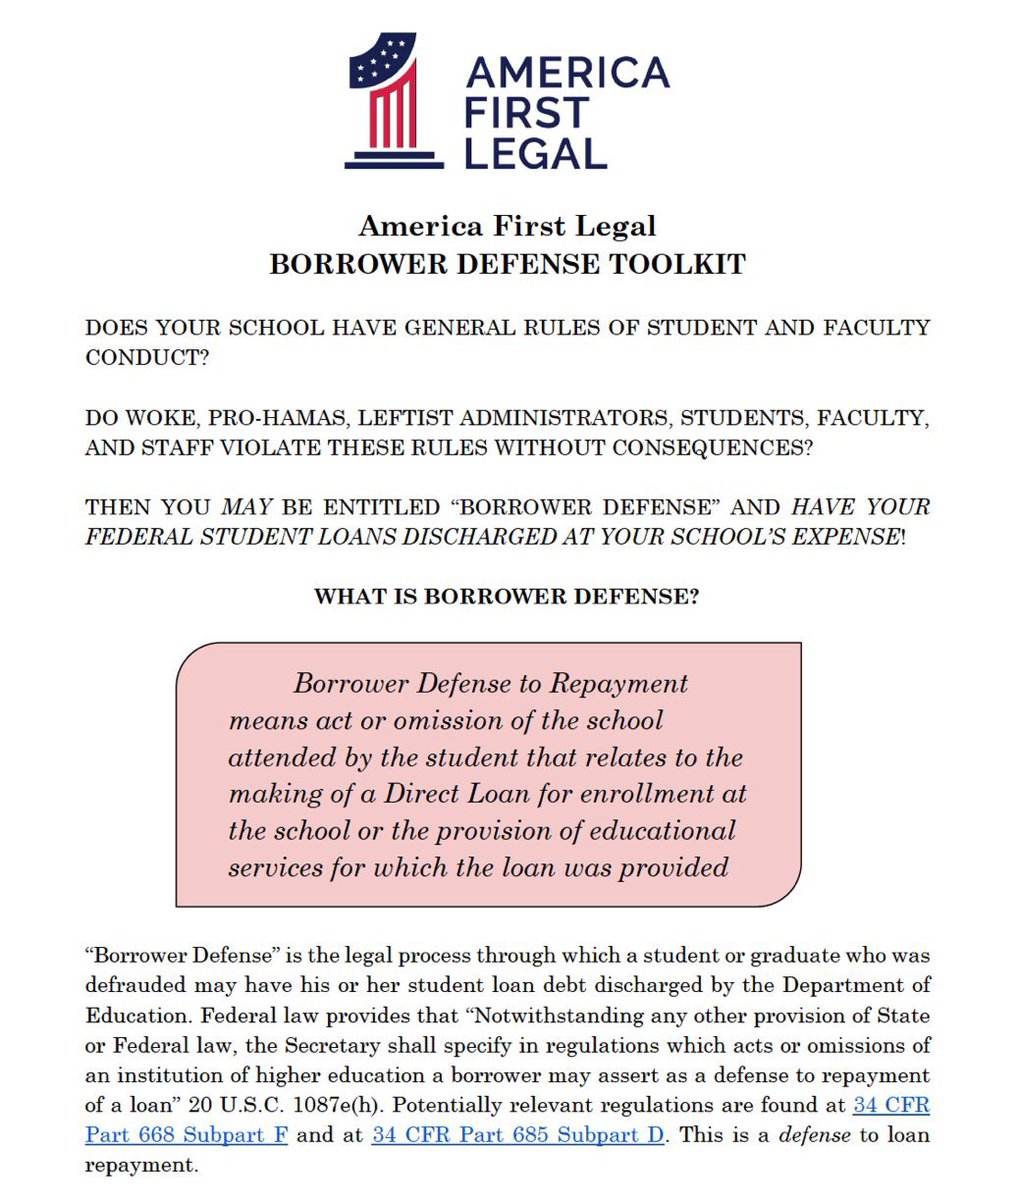 🚨STUDENTS OF COLUMBIA & ACROSS THE COUNTRY🚨 Do woke, pro-hamas, leftist students and faculty violate these rules without consequences? You may be entitled “borrower defense” and have your federal student loans discharged at your school’s expense!